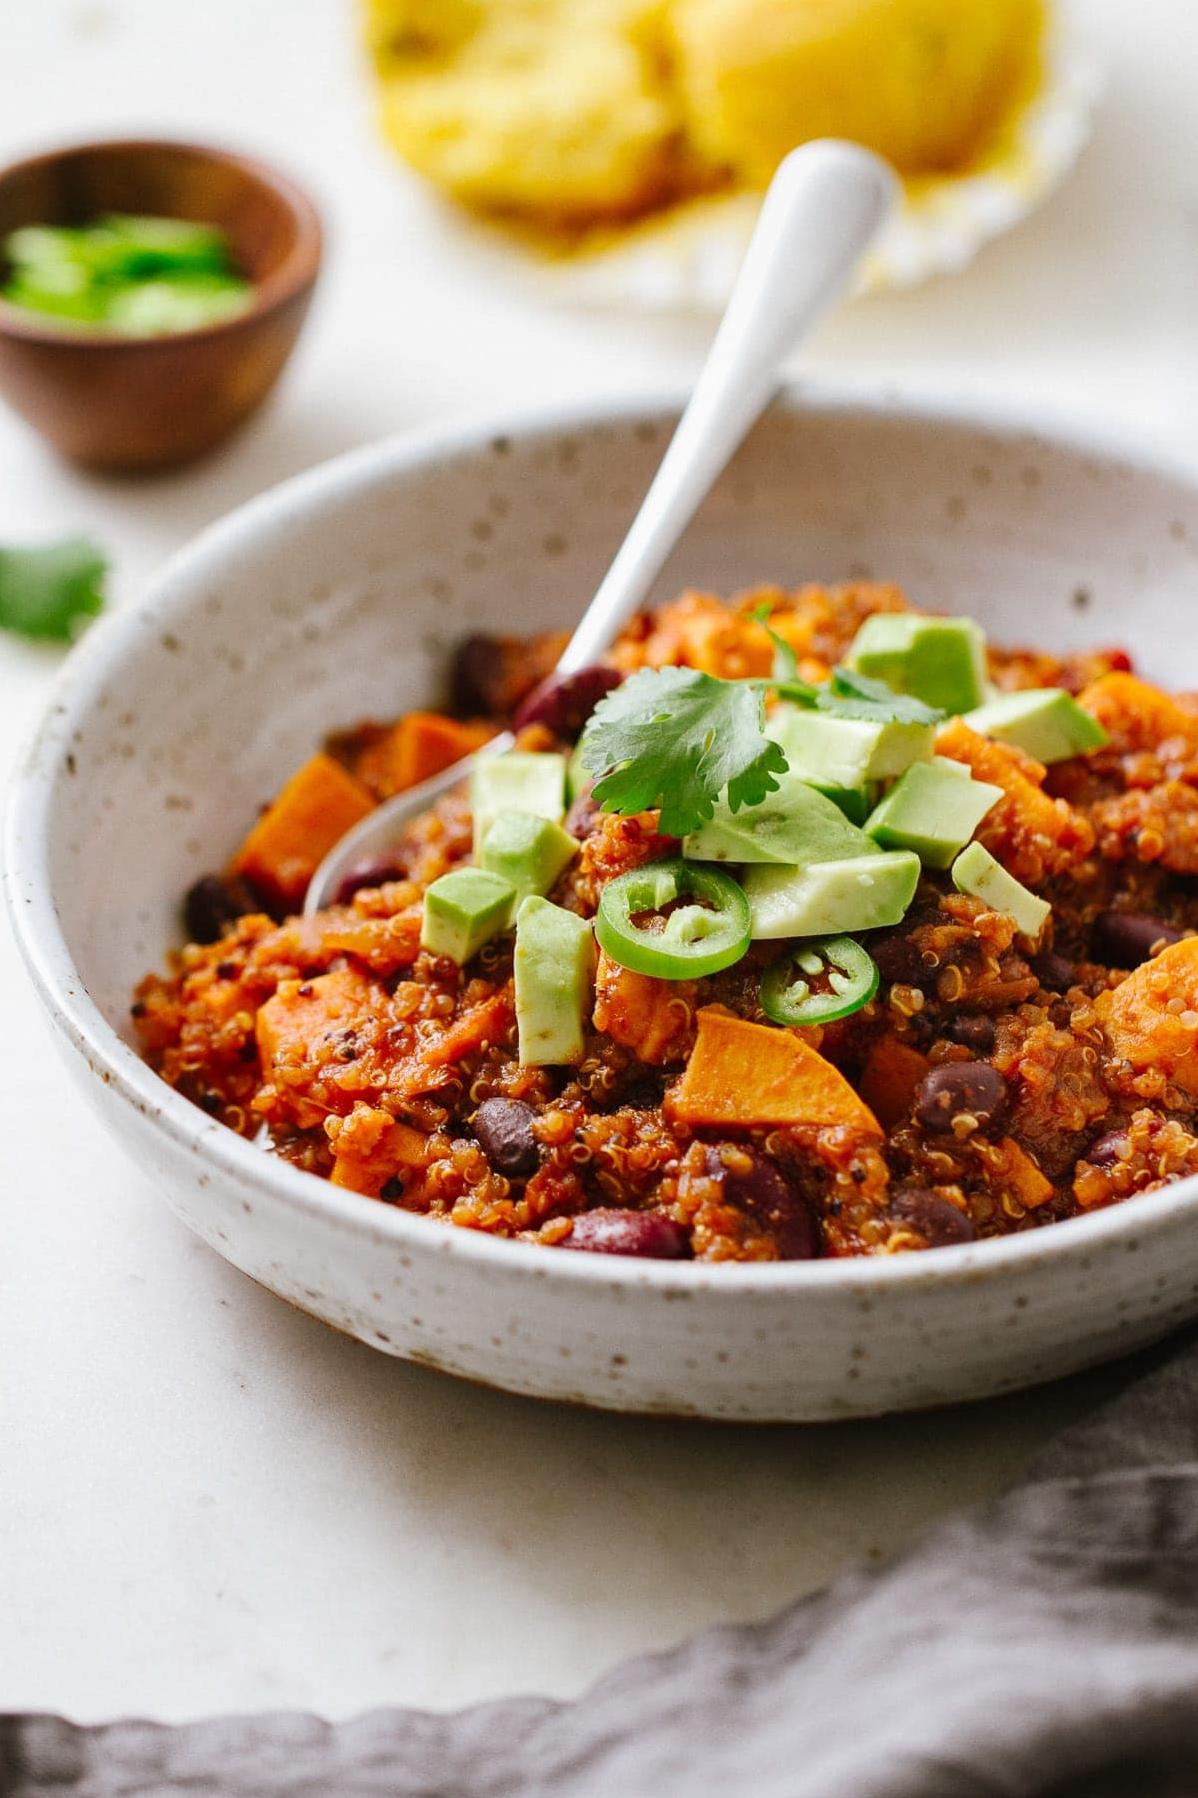  This slow cooker chili is full of flavor and completely plant-based